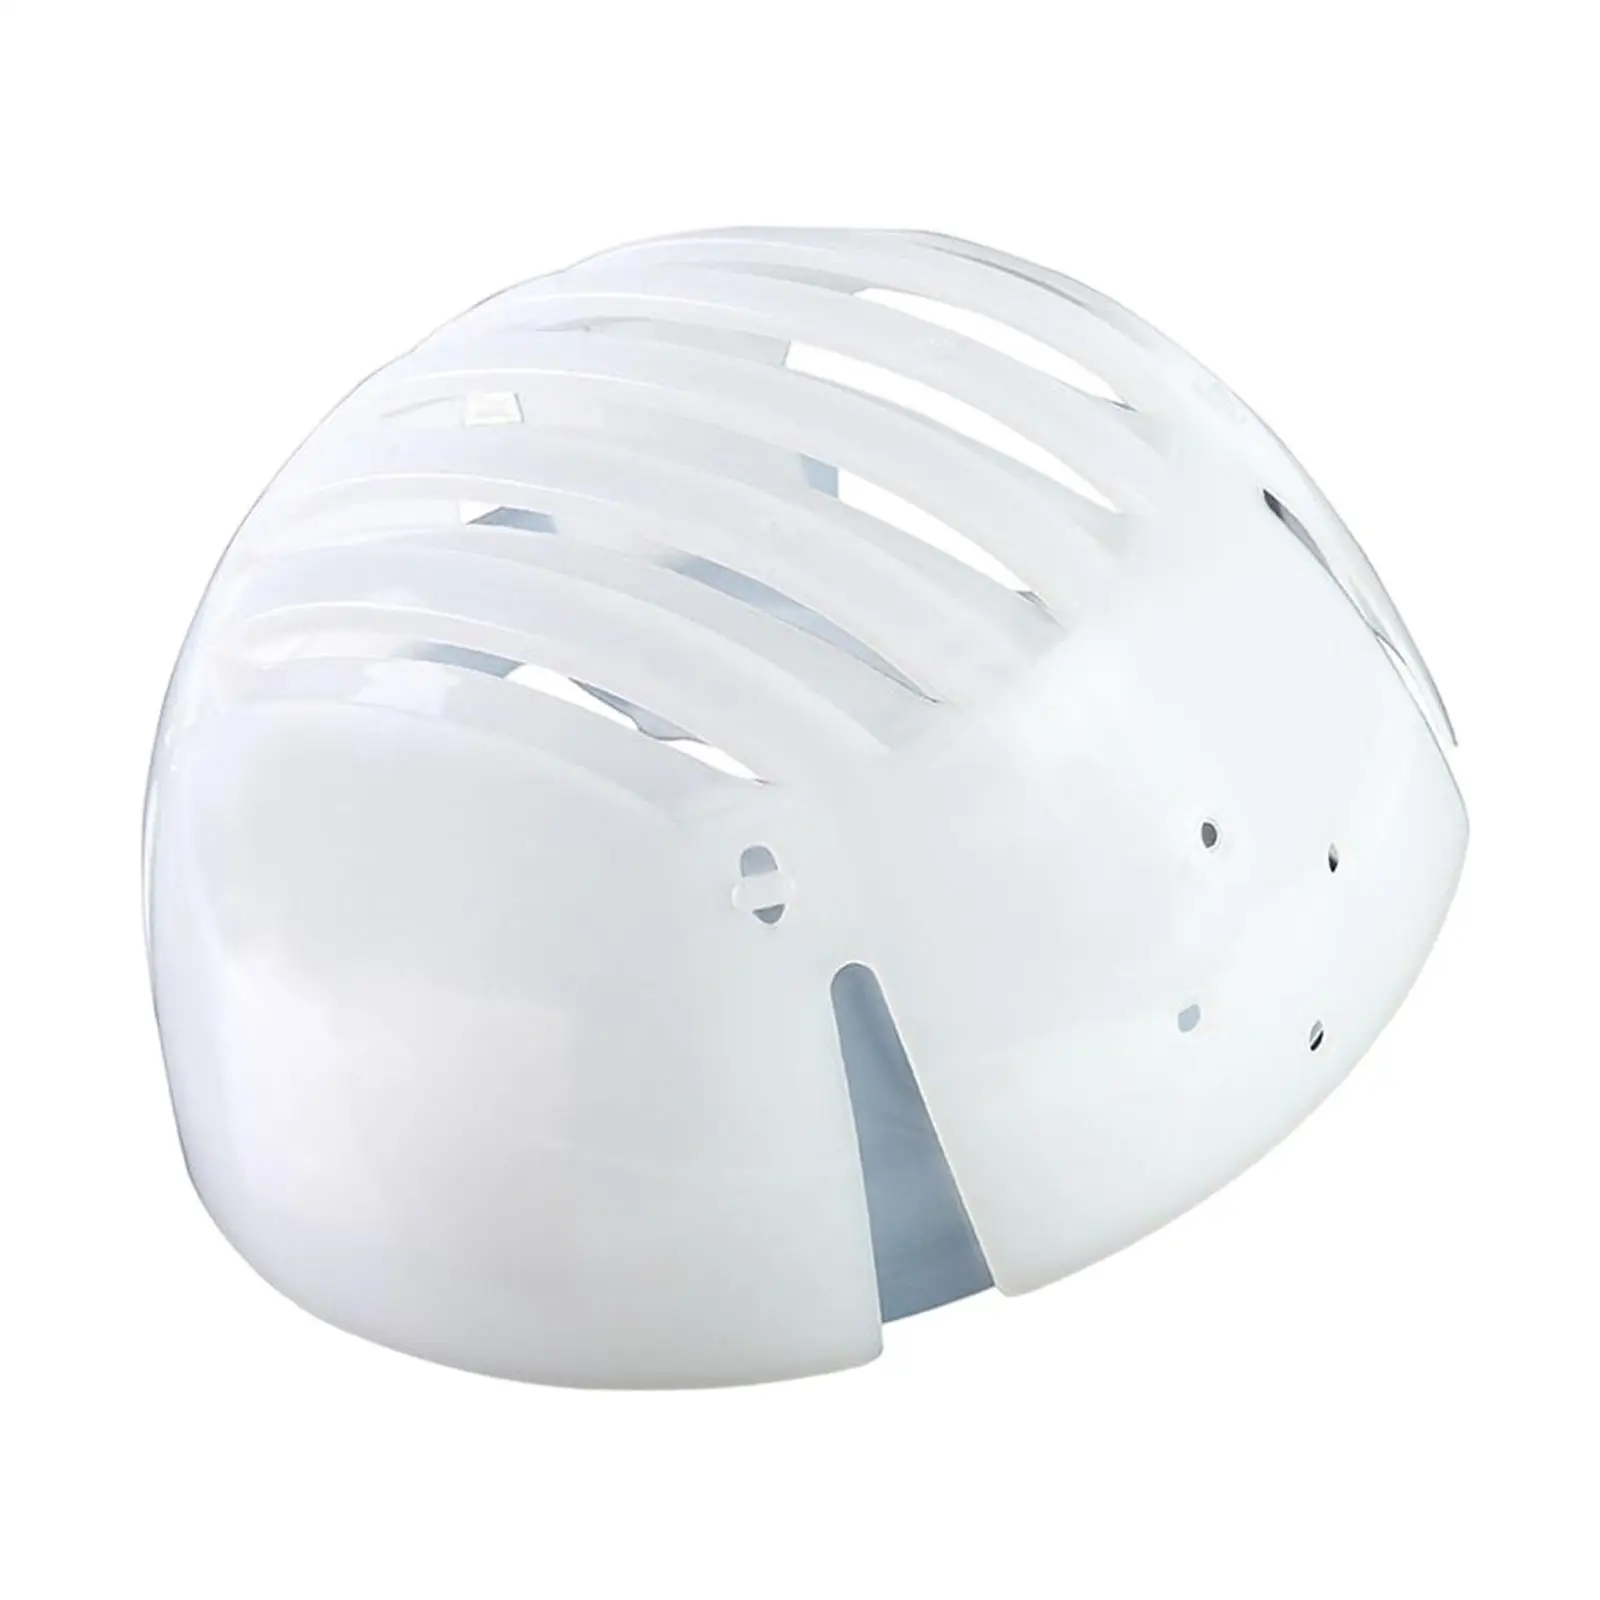 Outside Safety Helmet Protective Hat Lining White Simple to Use Comfort Durable Head Protection Bump Cap Insert for Hat Outdoor